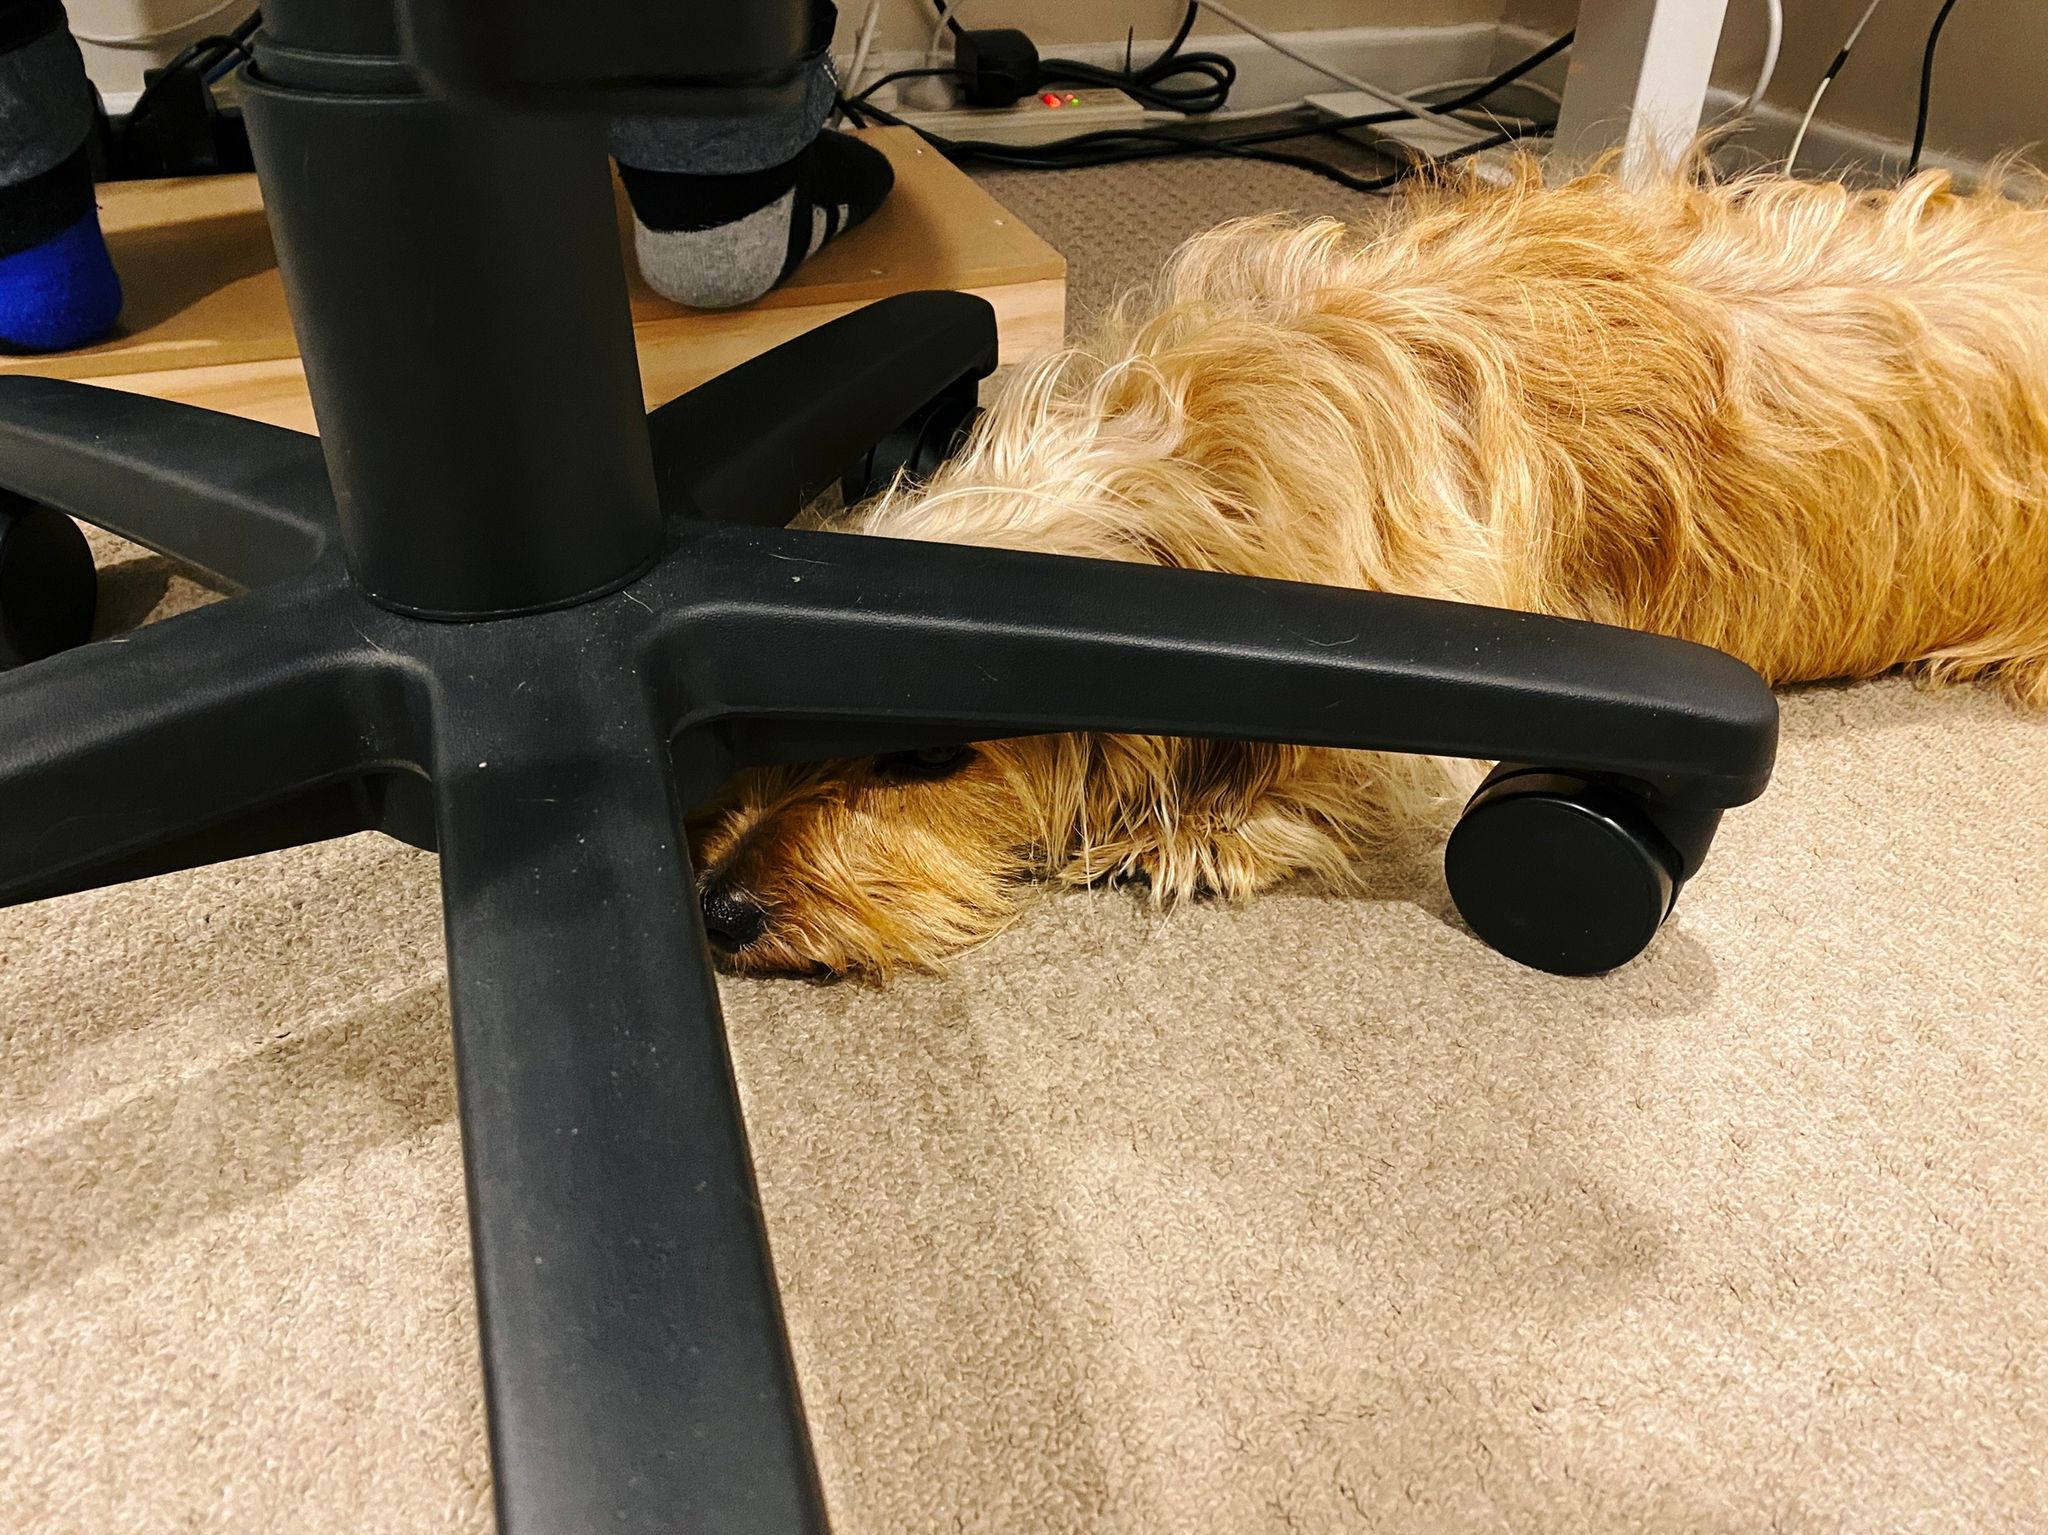 A photo of a small scruffy blonde dog lying on the floor with his head underneath the spokes of the base of an office chair that is currently being sat on.